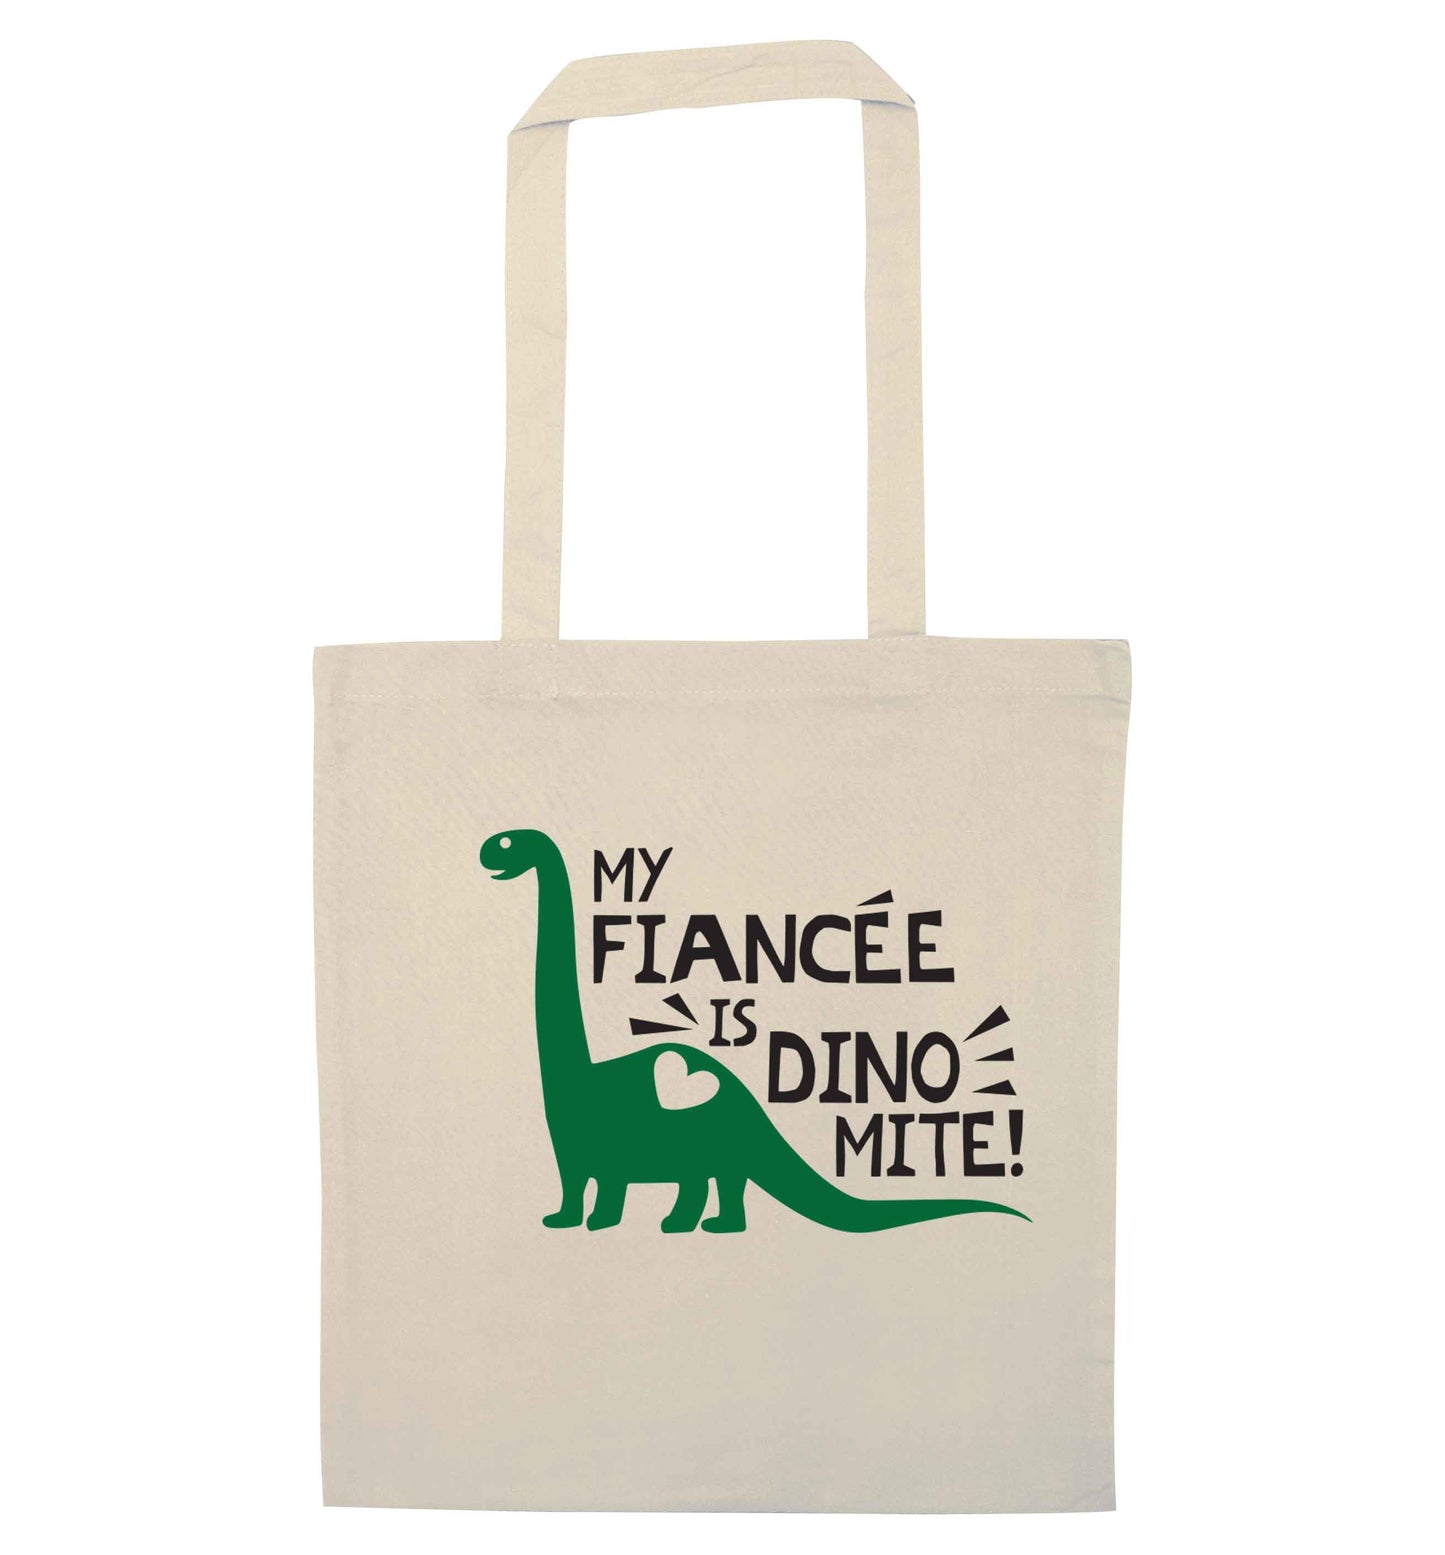 My fiancee is dinomite! natural tote bag